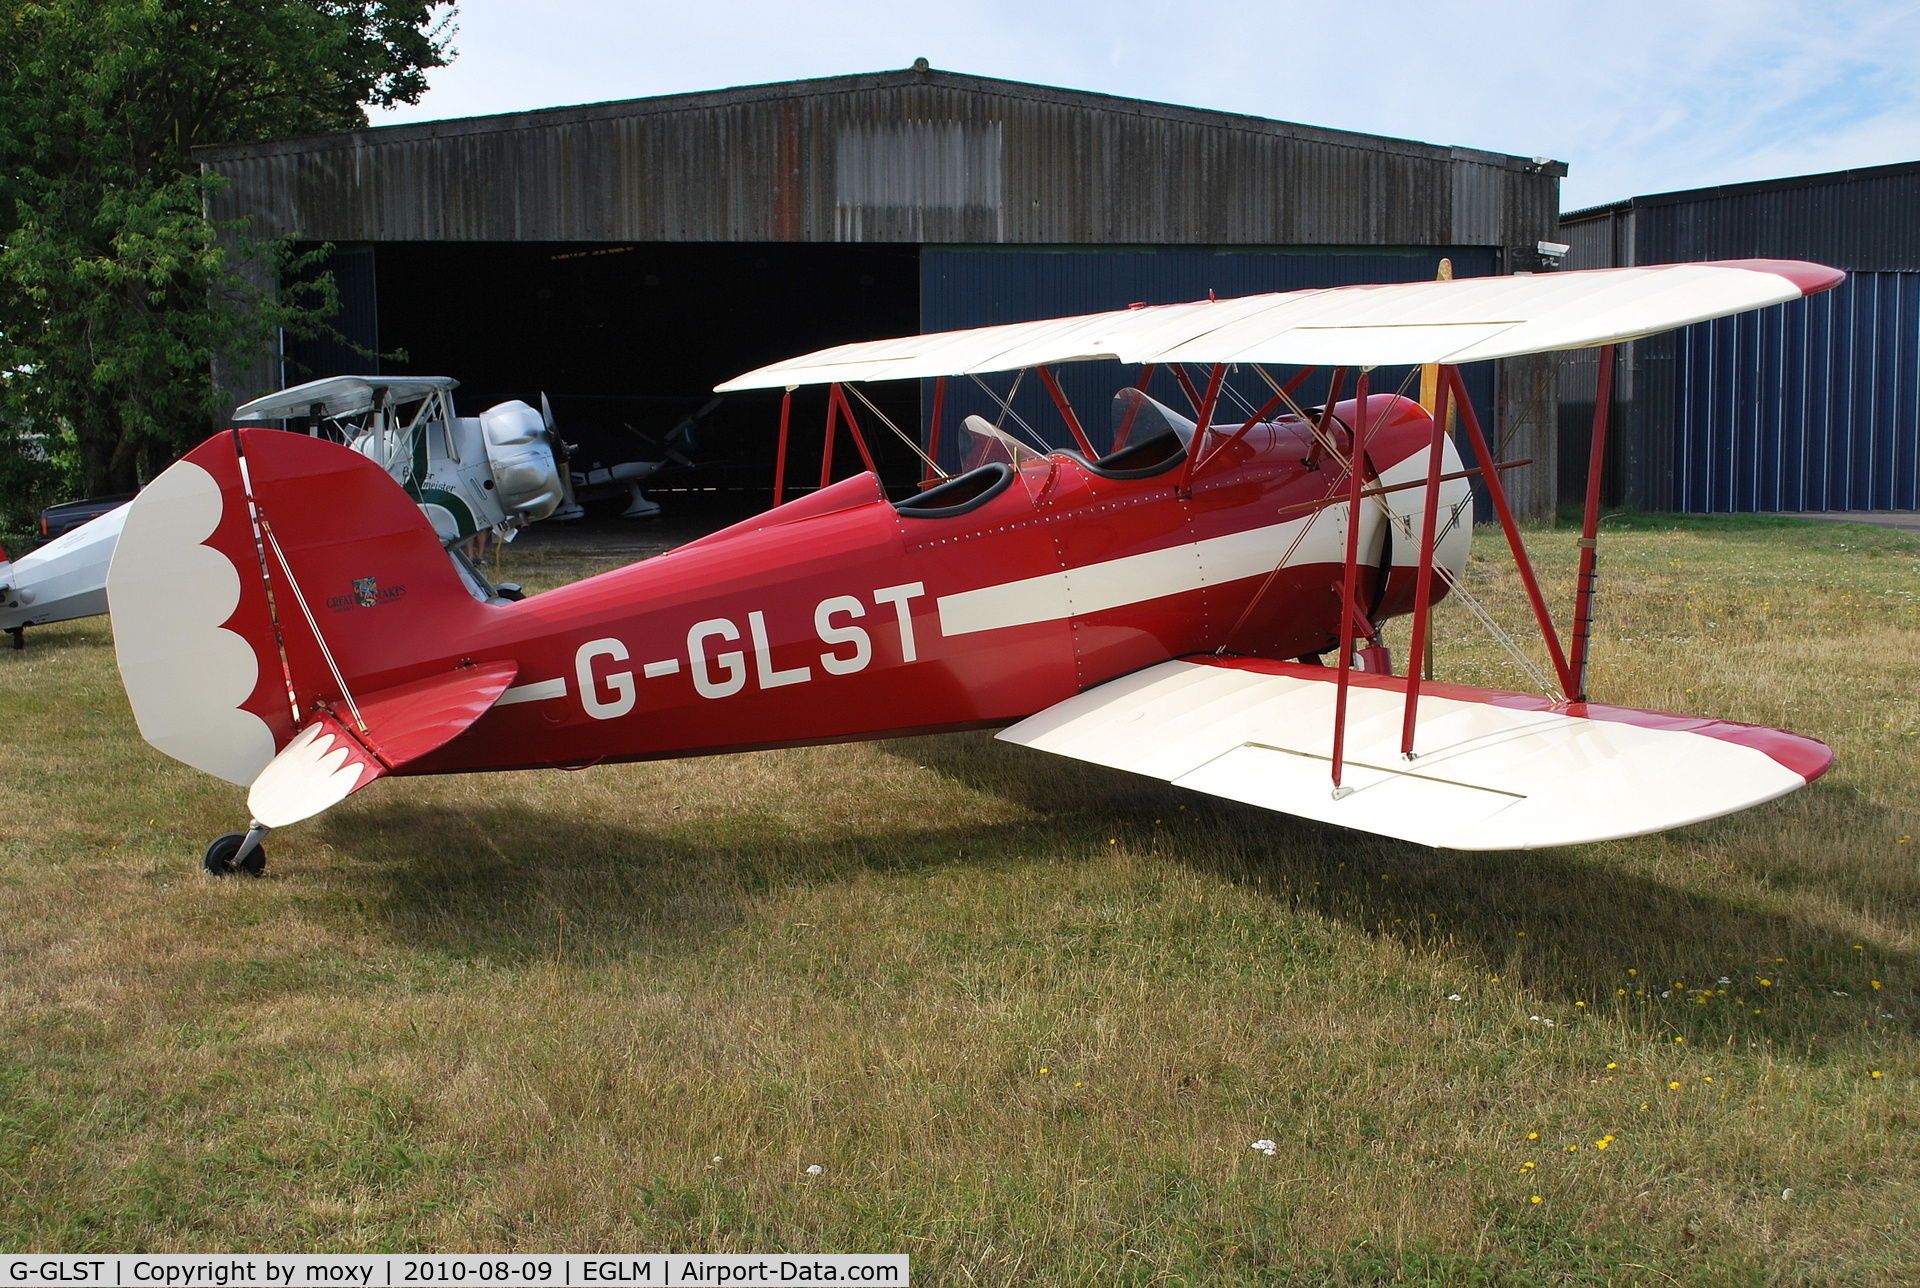 G-GLST, 2003 Great Lakes 2T-1A Sport Trainer C/N PFA 321-13646, Great Lakes Sports Trainer at White Waltham